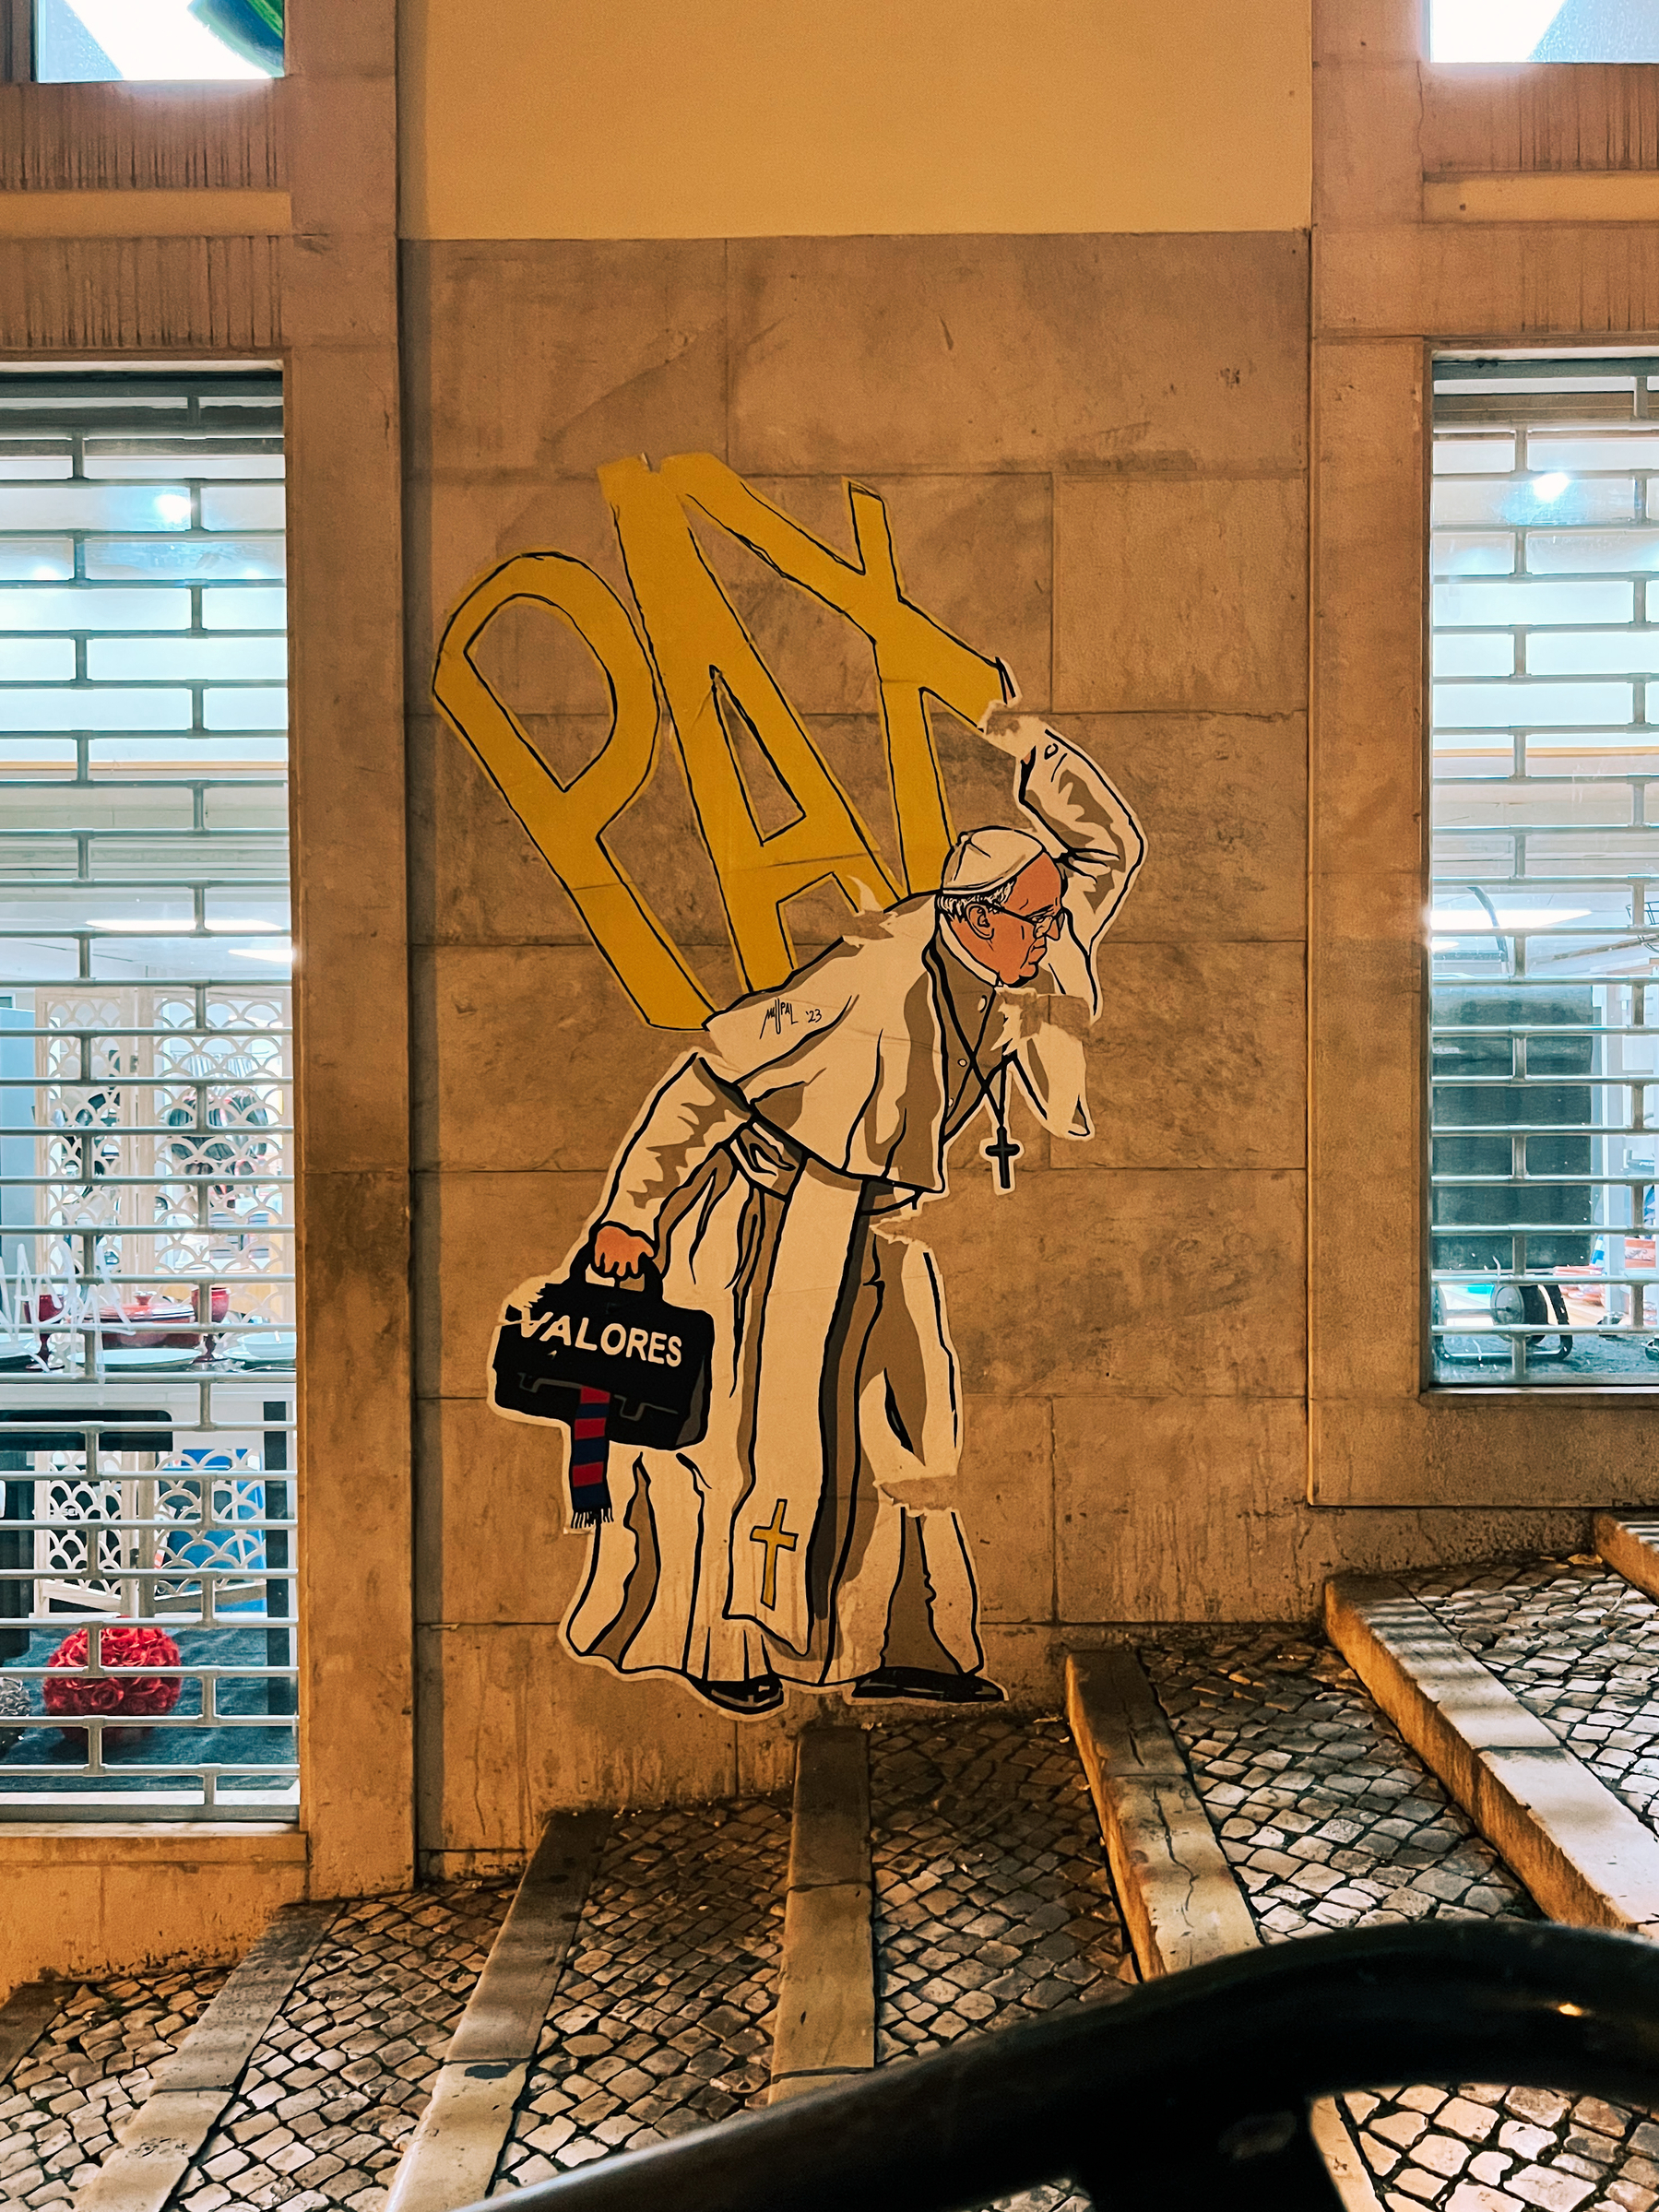 A life sized drawing of the pope carrying the word “PAX” on his back, and a bag with “valores” on one hand. 